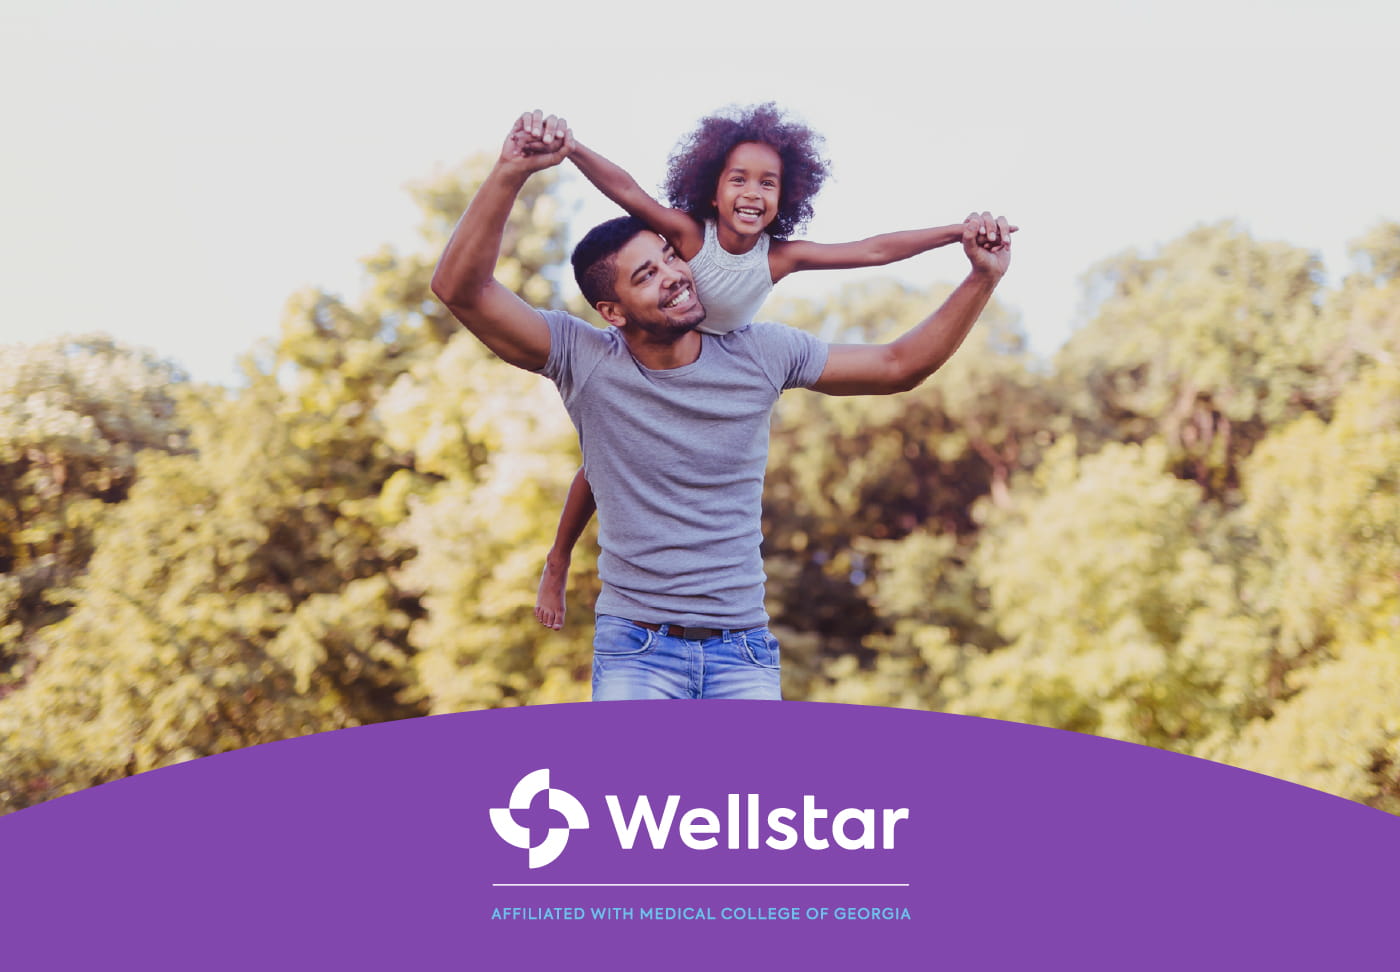 Parent with child on shoulders. Wellstar, affiliated with Medical College of Georgia logo